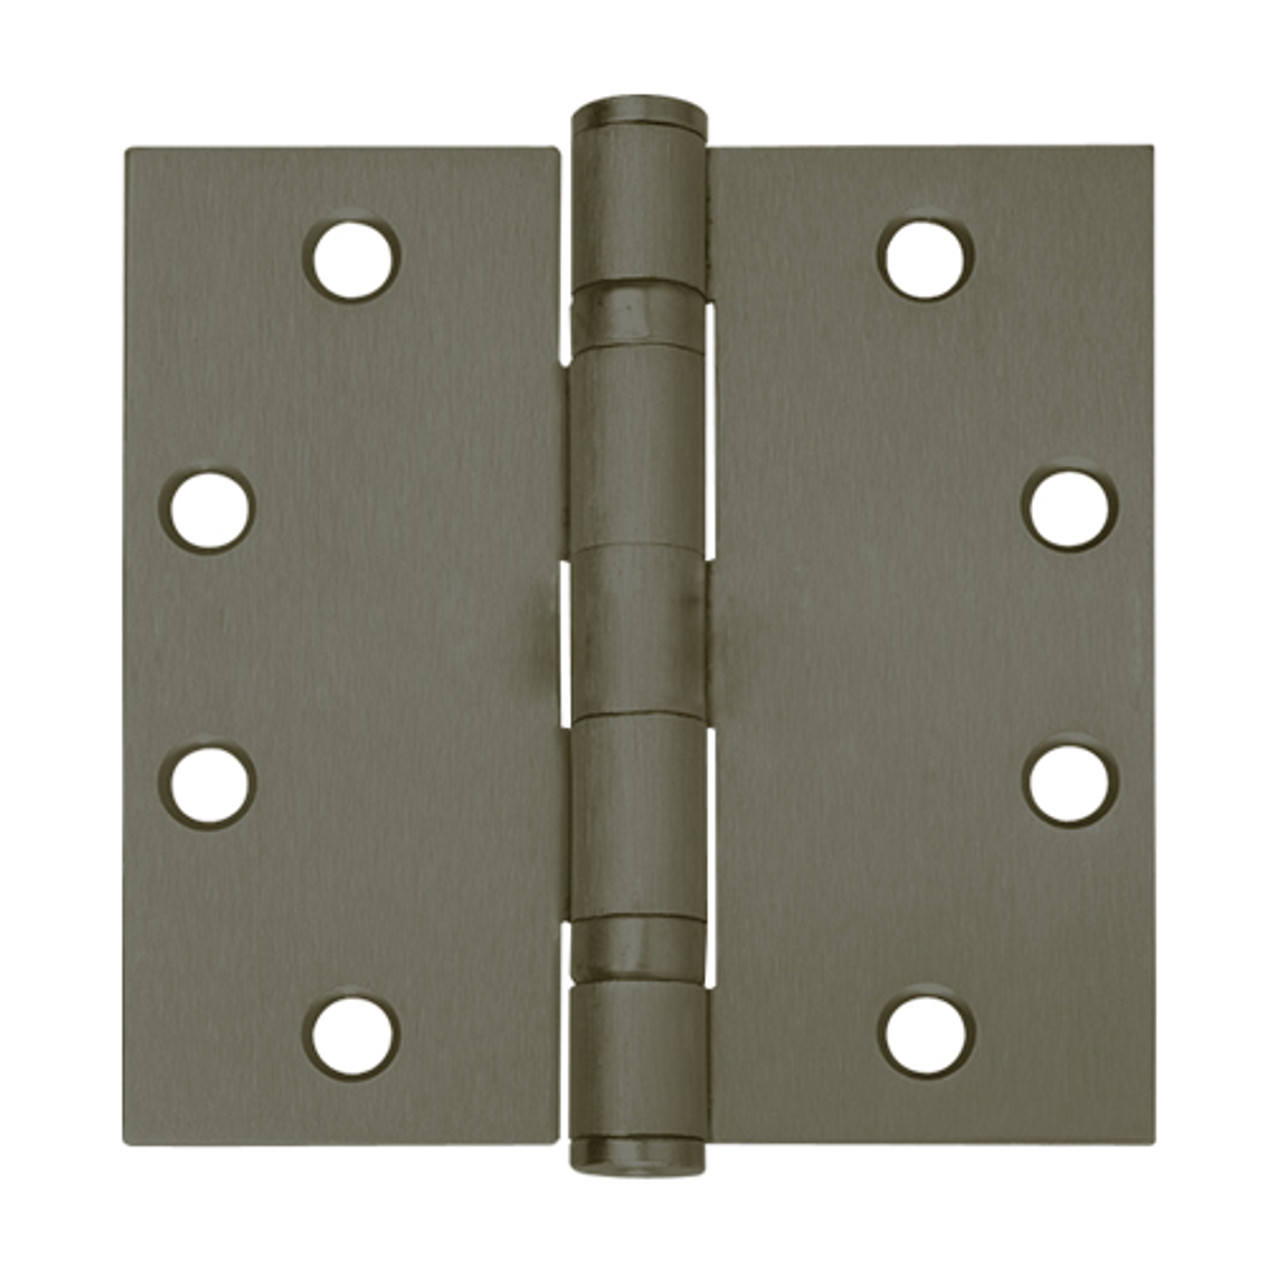 5BB1-4-5x4-5-640-TW4 IVES 5 Knuckle Ball Bearing Full Mortise Hinge with Electric Thru-Wire in Dark Bronze